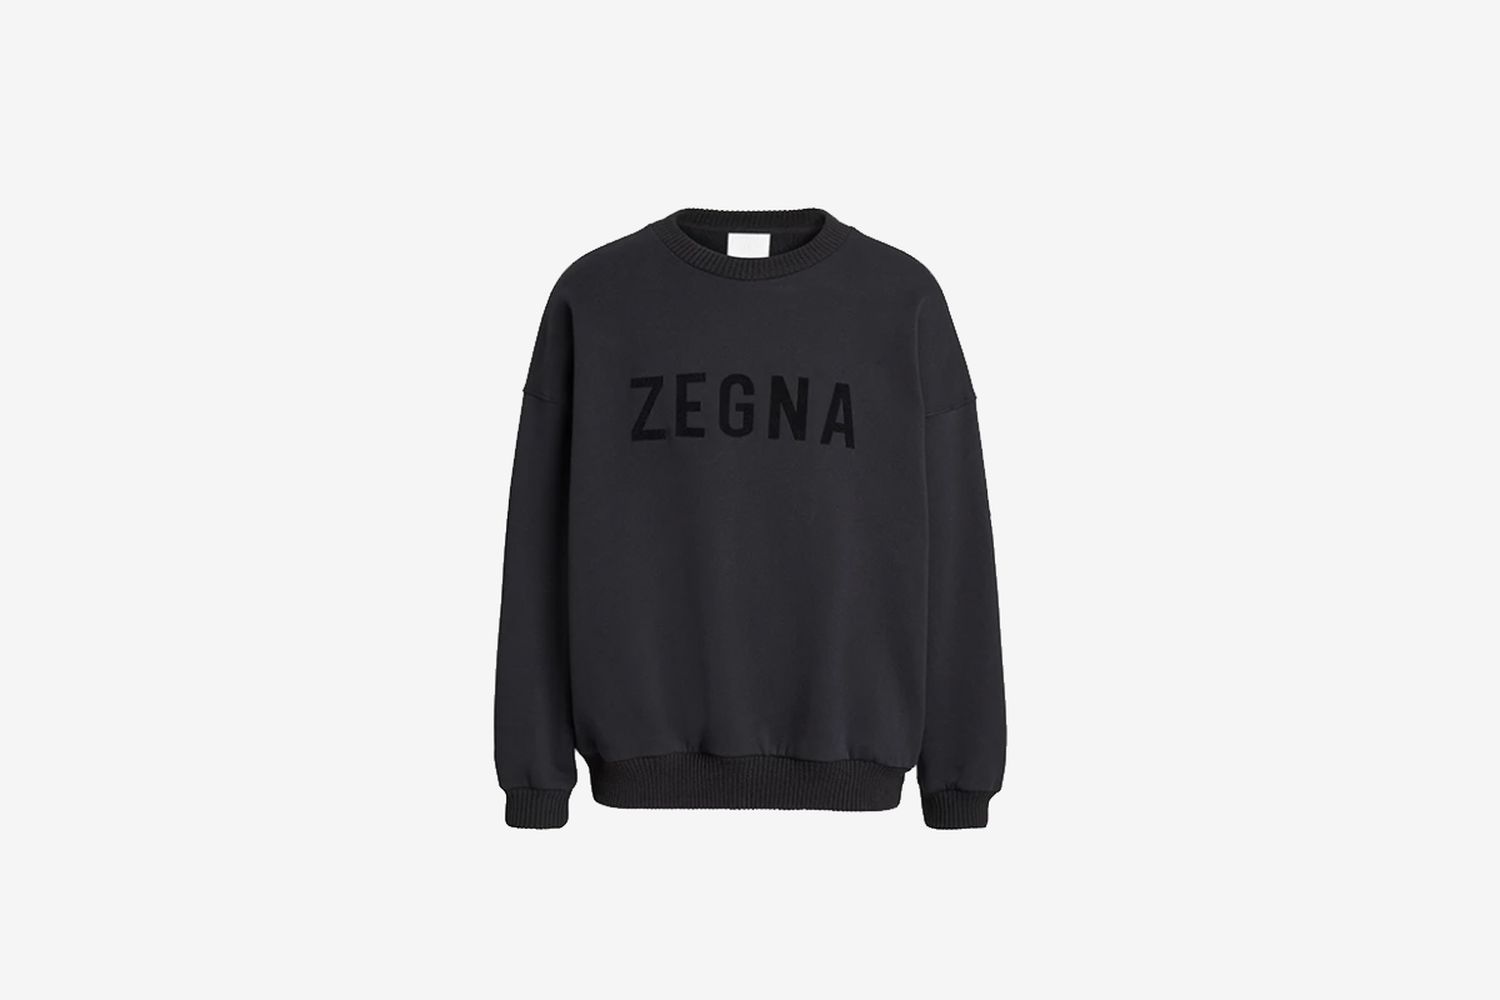 The Fear of God For Ermenegildo Zegna Pieces You Have to Own